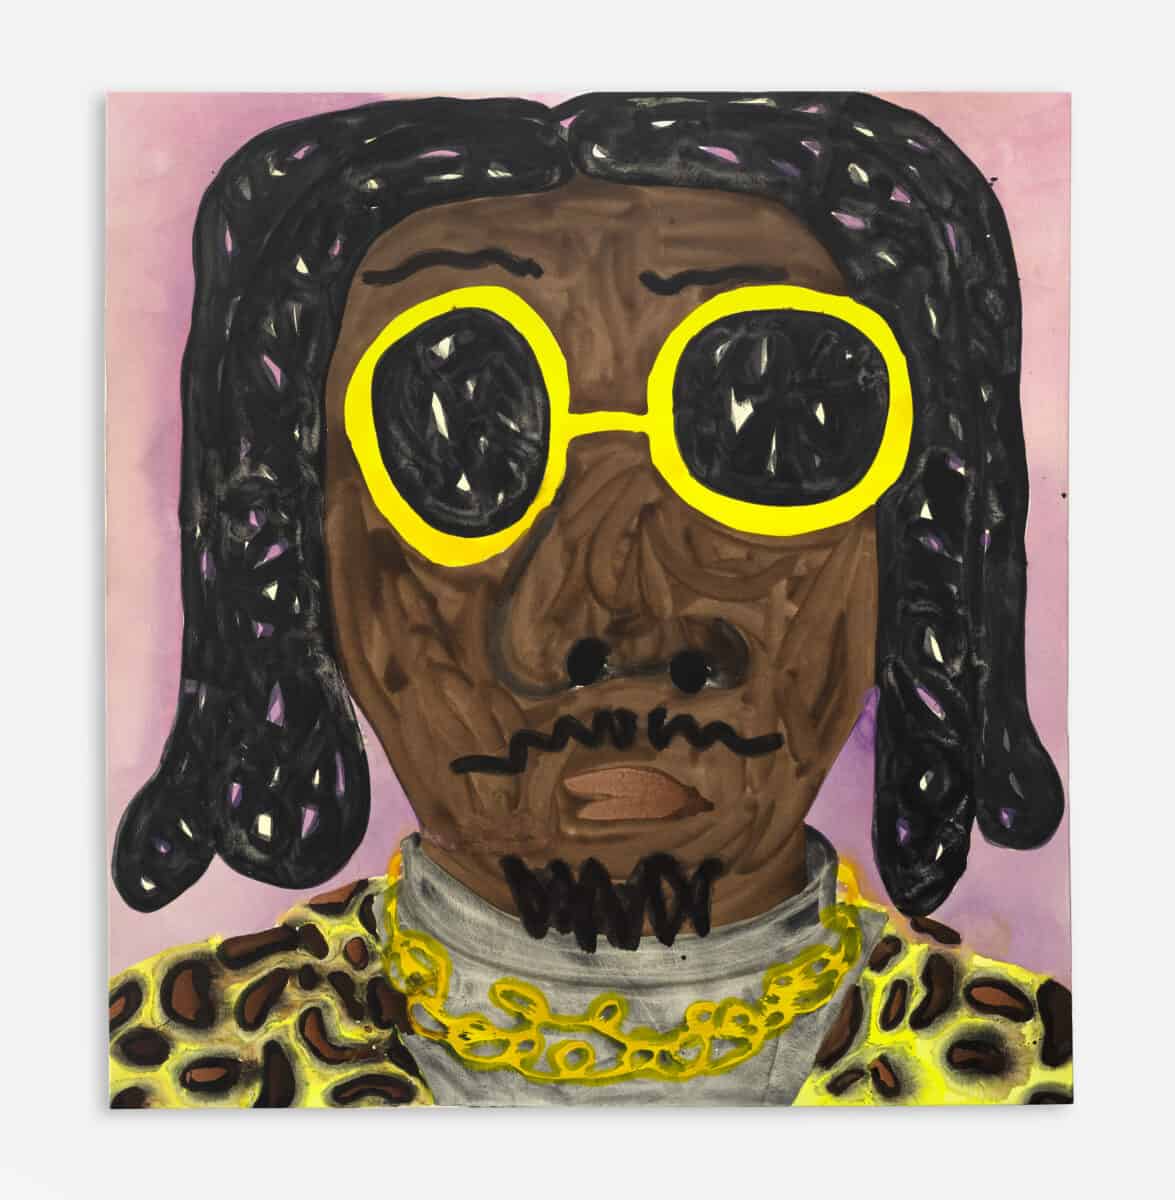 Travis Fish, Offset, 2018. Acrylic on canvas, 84 by 80 in (213.36 by 203.2 cm). Courtesy of the artist and Jupiter Contemporary, Miami.